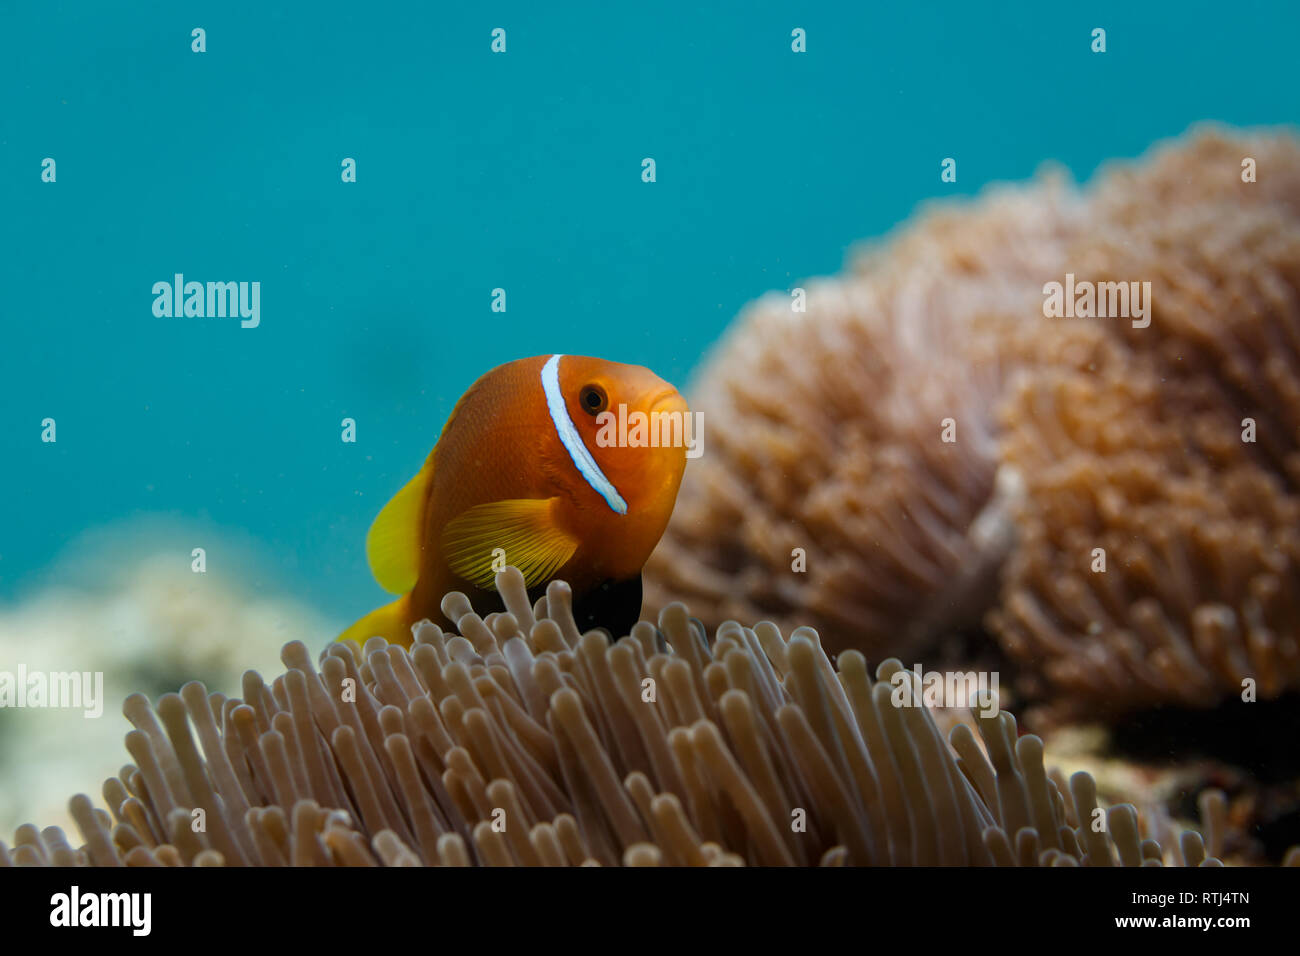 ocellaris clownfish that dwell among the tentacles of Ritteri sea anemones for protection Stock Photo